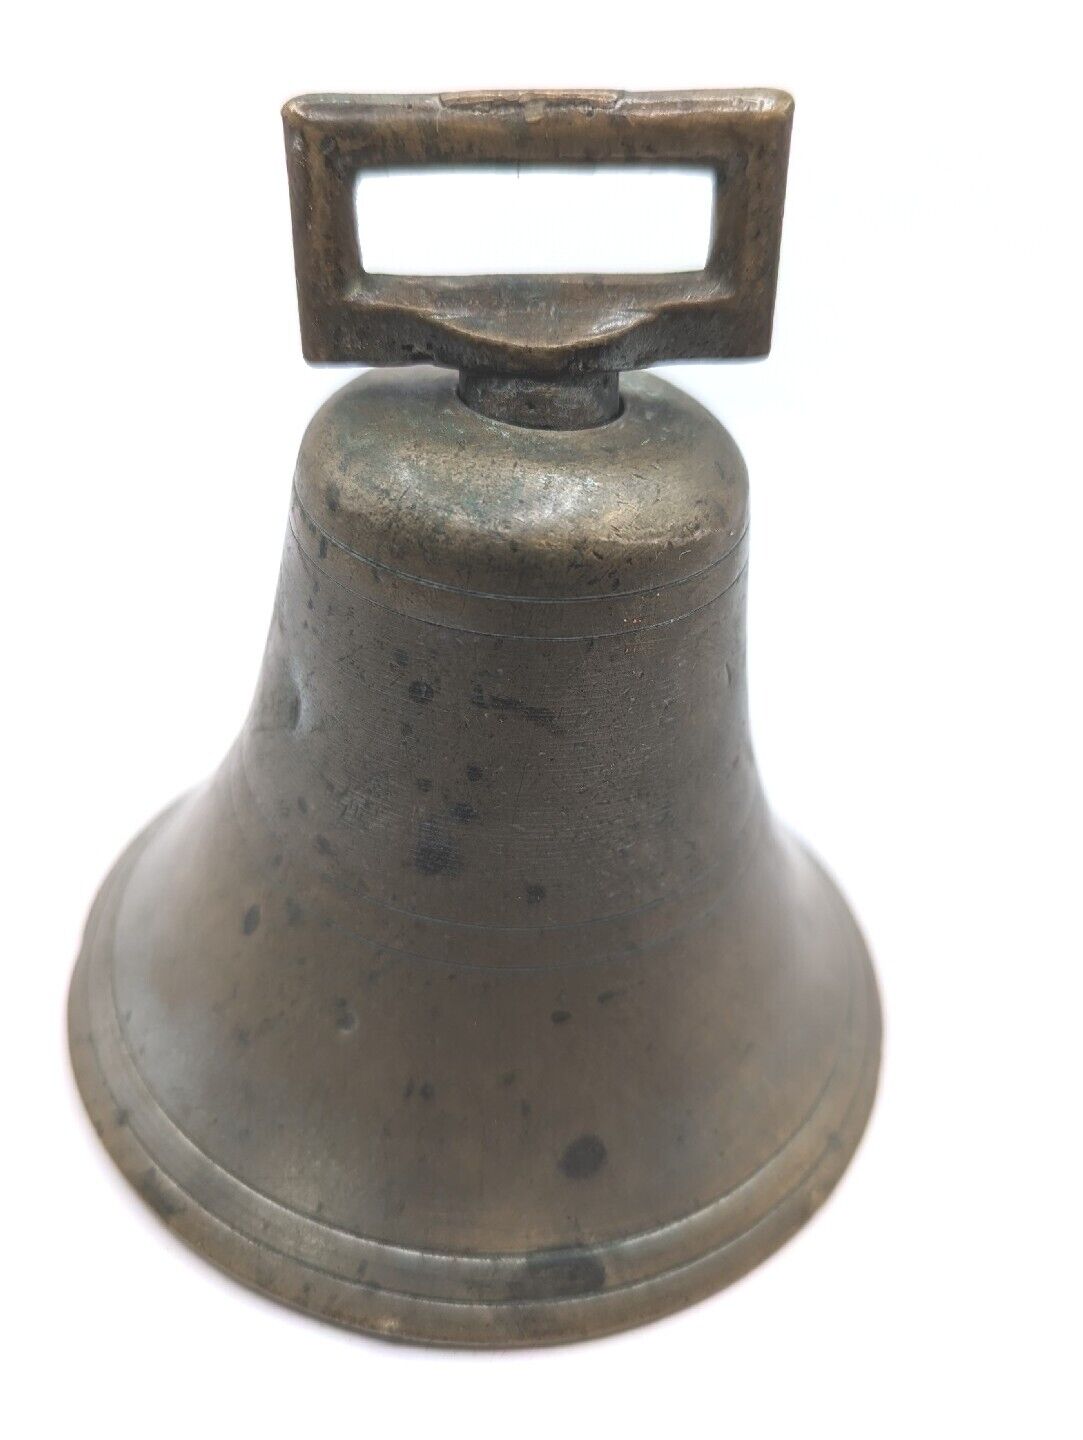 Vintage Brass Country Cow / Sheep Bell - 3.25